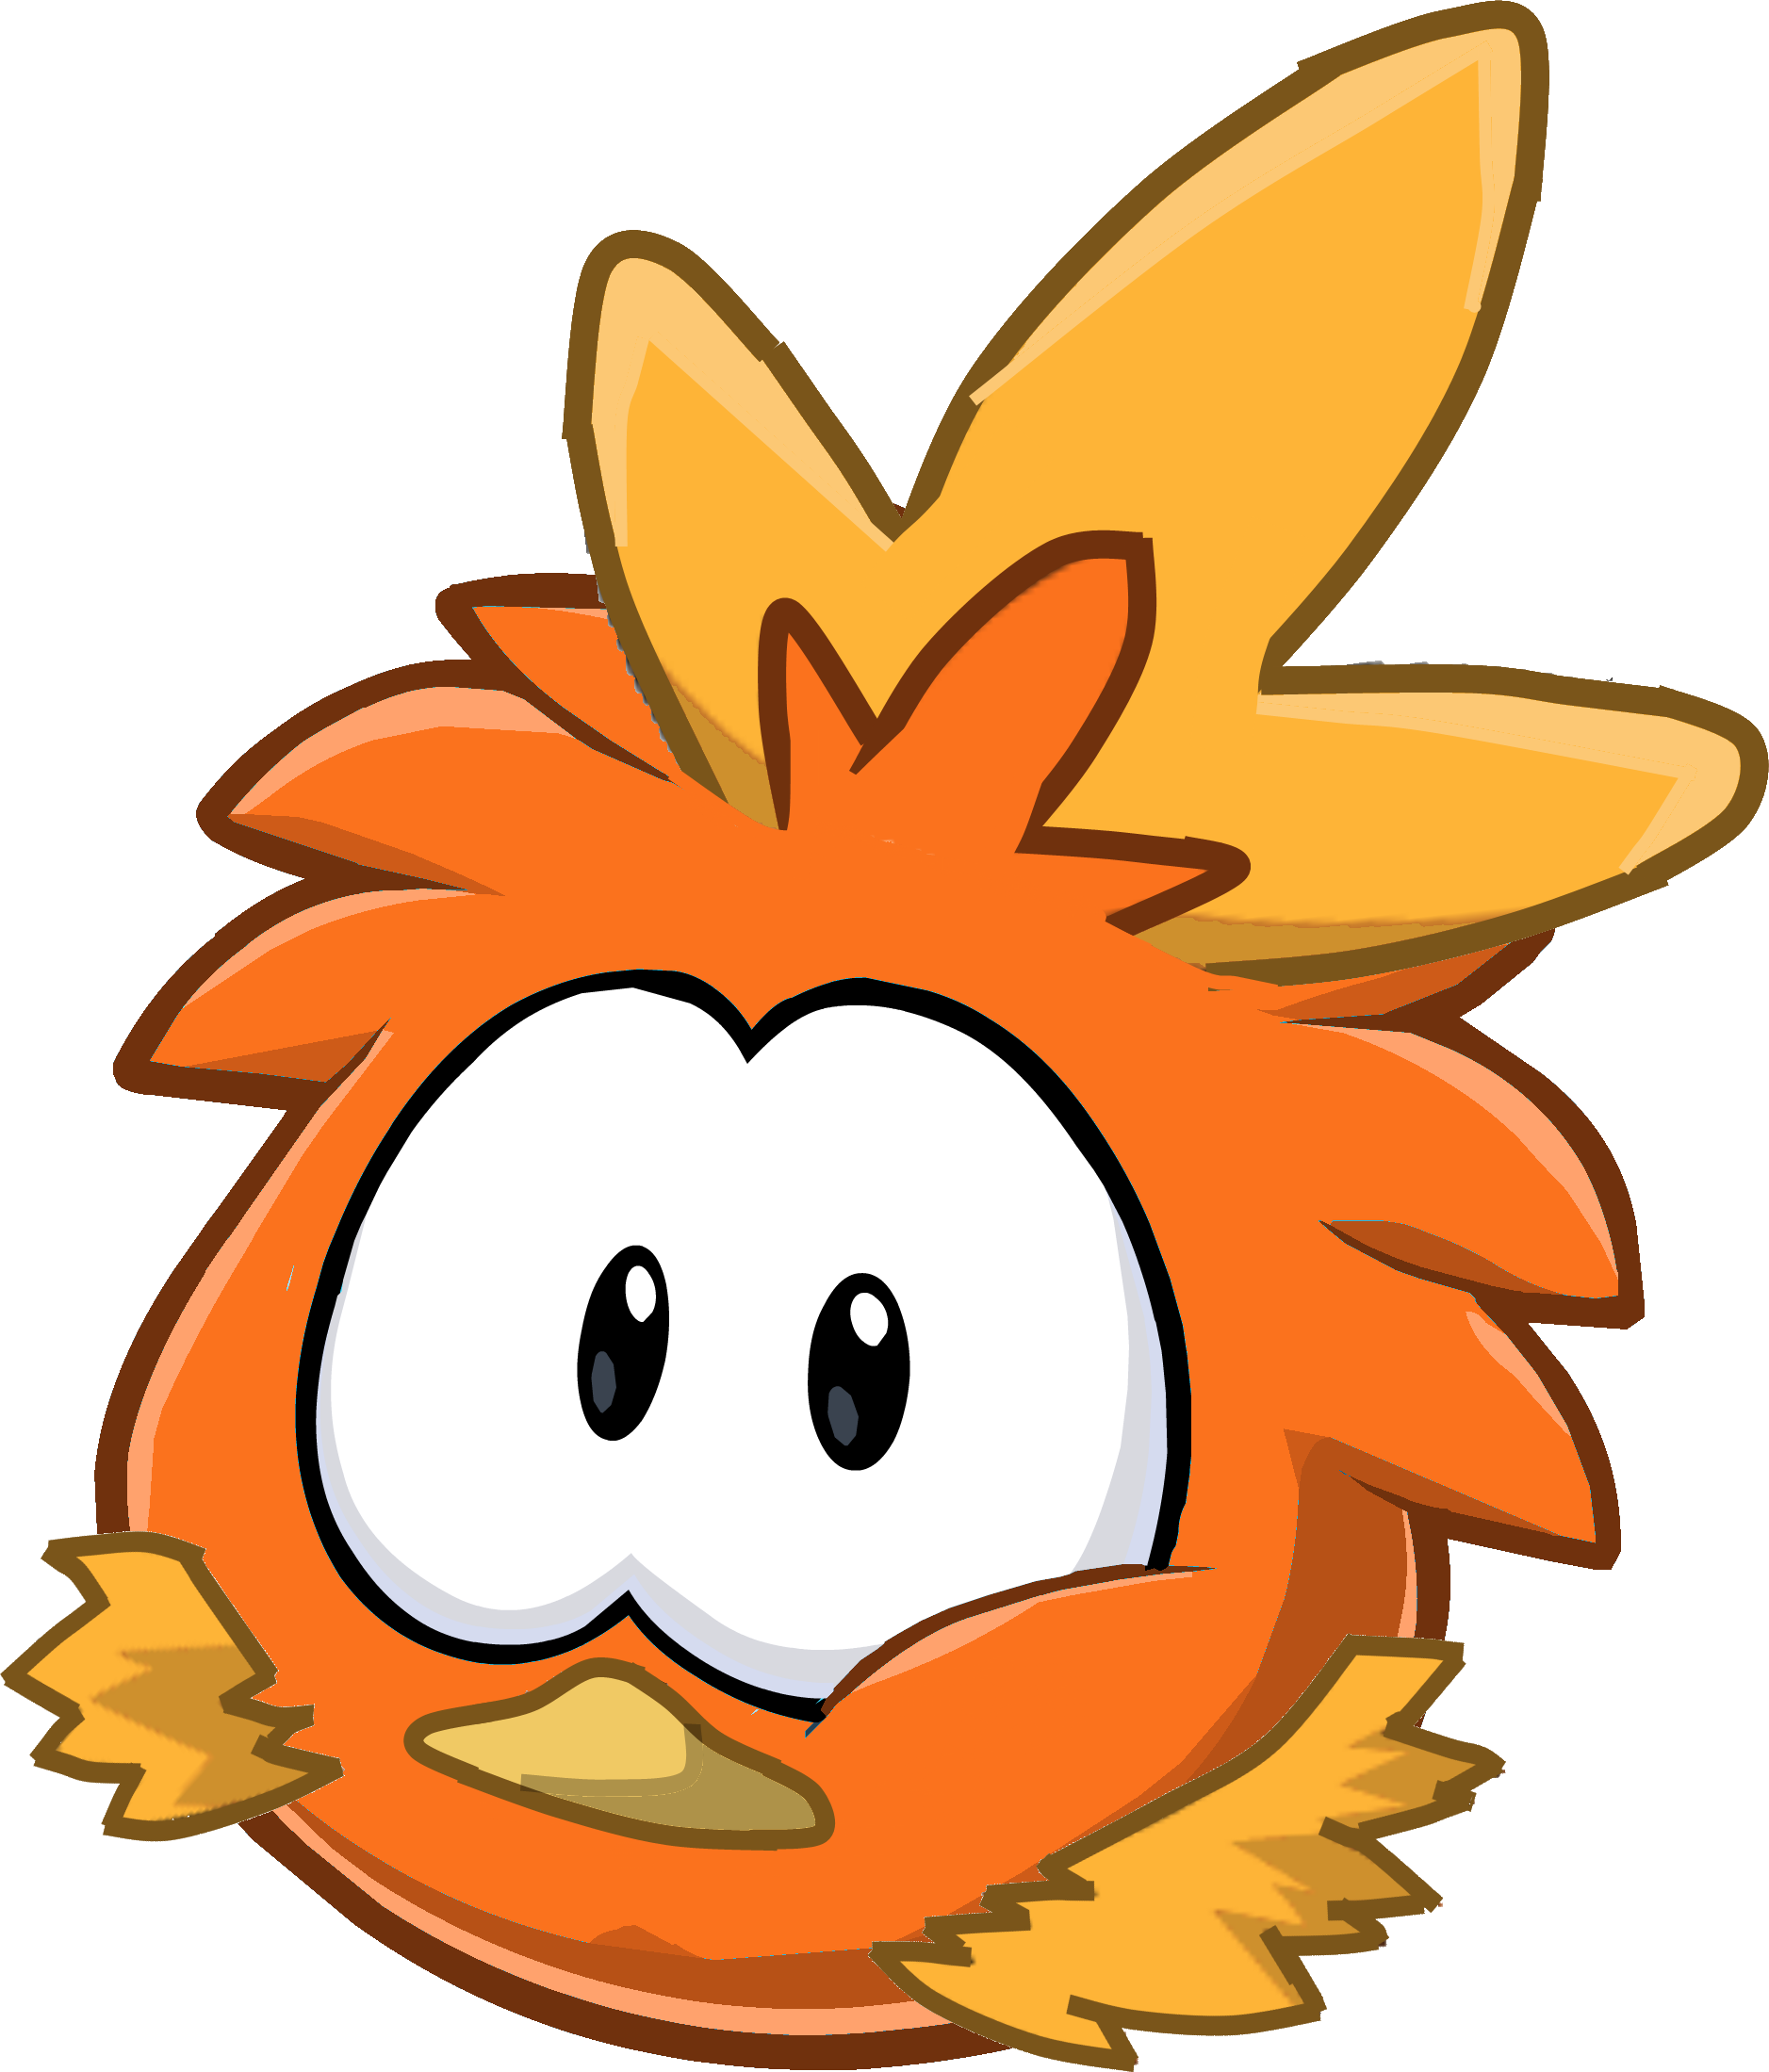 Download Torchic Puffle - Club Penguin Puffles Pokemon PNG Image with No  Background 